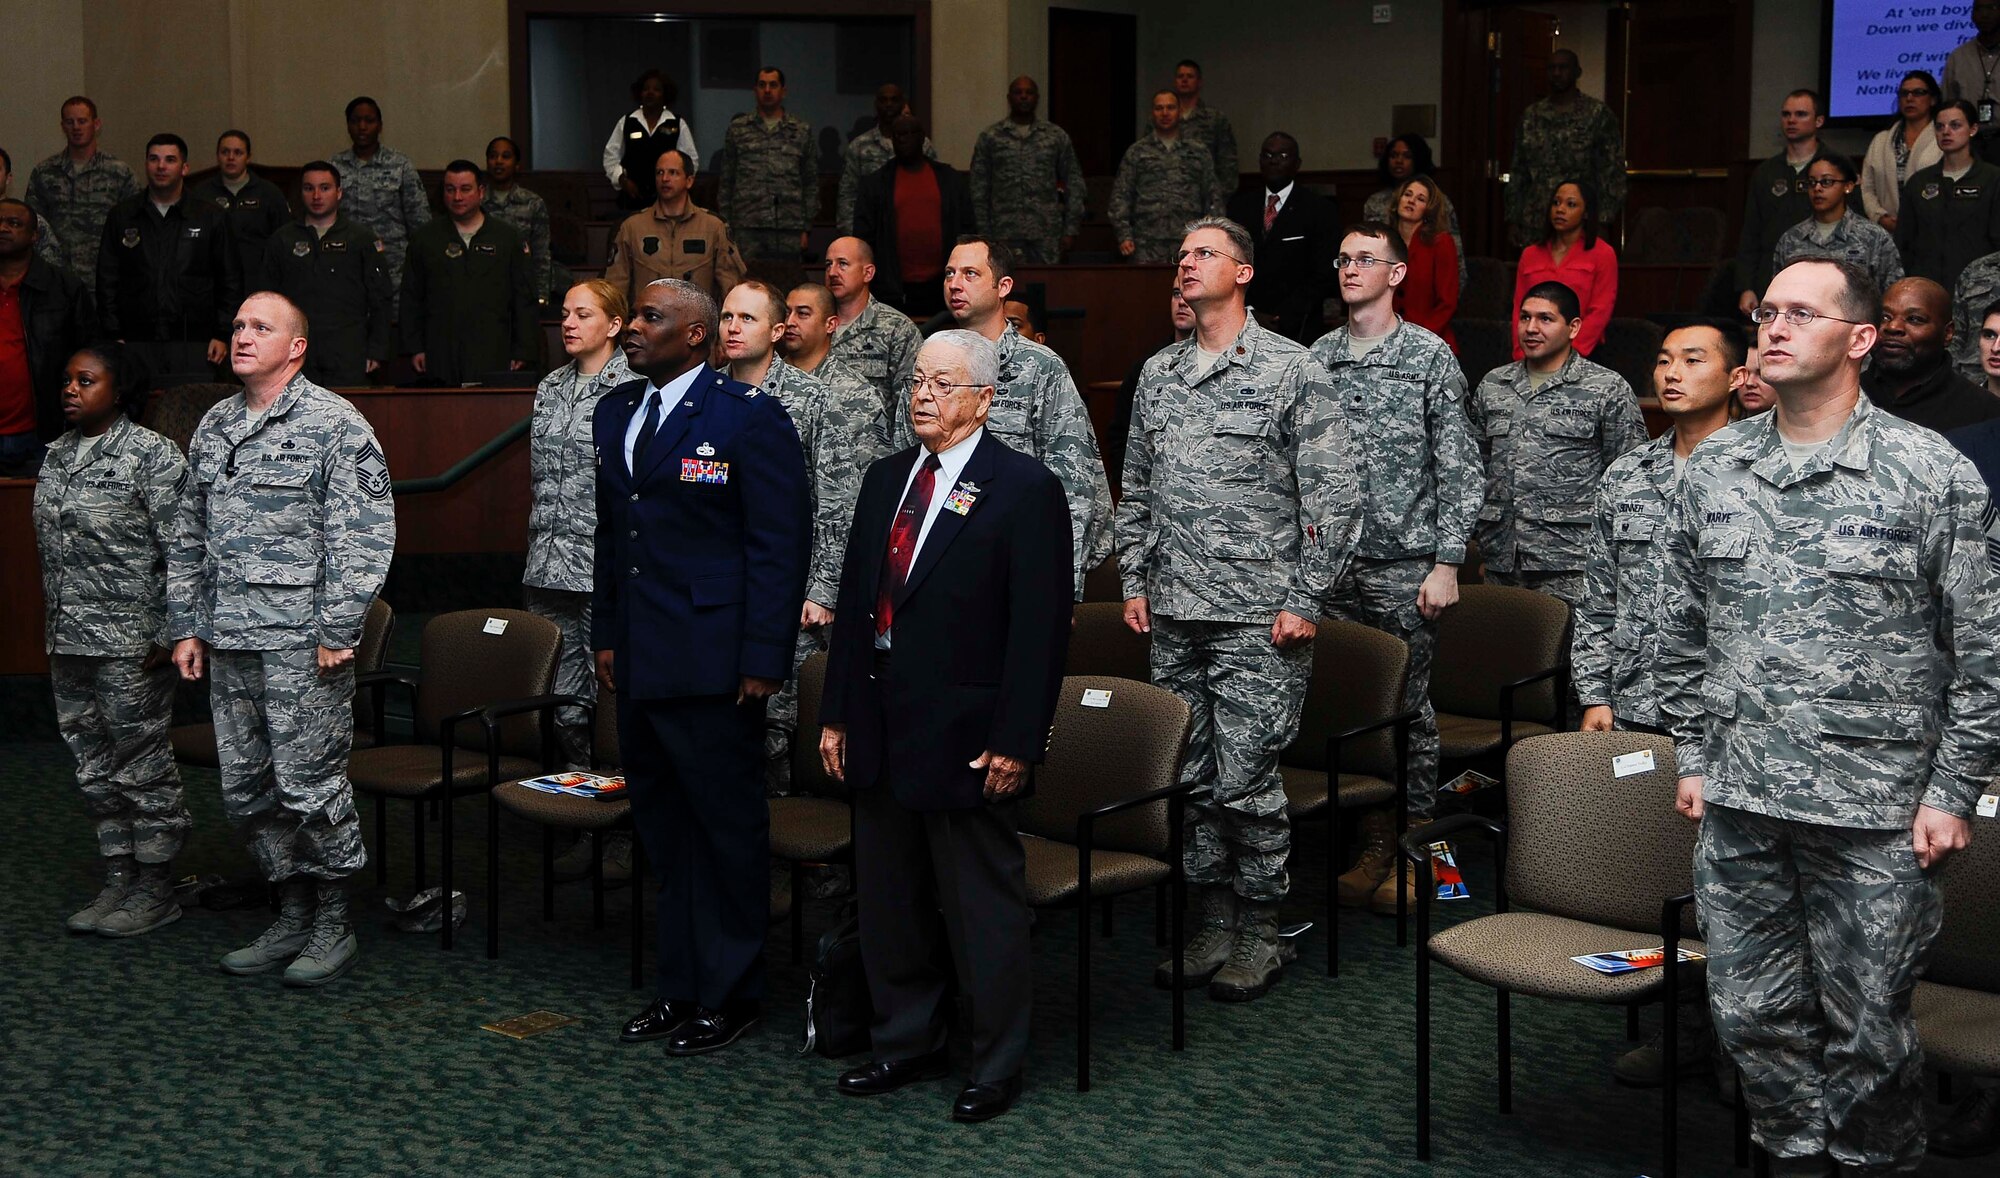 (Center Right) Retired Lt. Col. George E. Hardy, a Tuskegee Airman, and Col. Reginald Godbolt, commander of the 6th Maintenance Group, stand with the audience and sing the Air Force song during the “A Salute To A Living Legend” event at MacDill Air Force Base, Fla., Feb. 11, 2016. The event was held in the Davis Conference Center, which was named in honor of the late Gen. Benjamin O. Davis Jr. who was also a Tuskegee Airman and served as commander of the 99th Fighter Squadron and 332nd Fighter Group during World War II. (U.S. Air Force photo by Senior Airman Vernon L. Fowler Jr.)